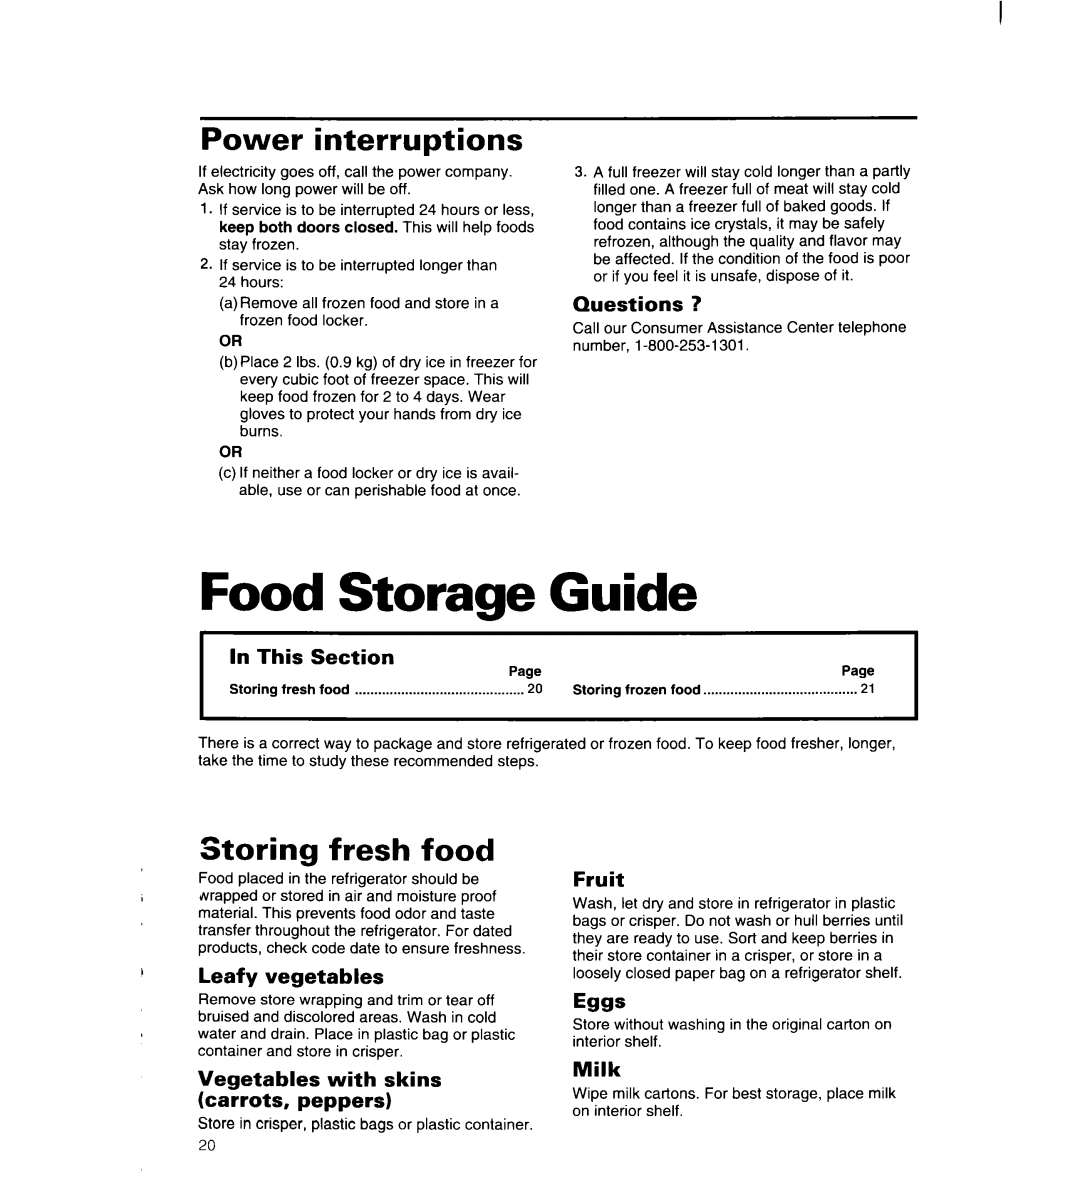 Whirlpool 8ED22PW Guide, Power interruptions, Storing fresh food, Eggs, Questions, Leafy vegetables, Fruit, Milk, Storage 